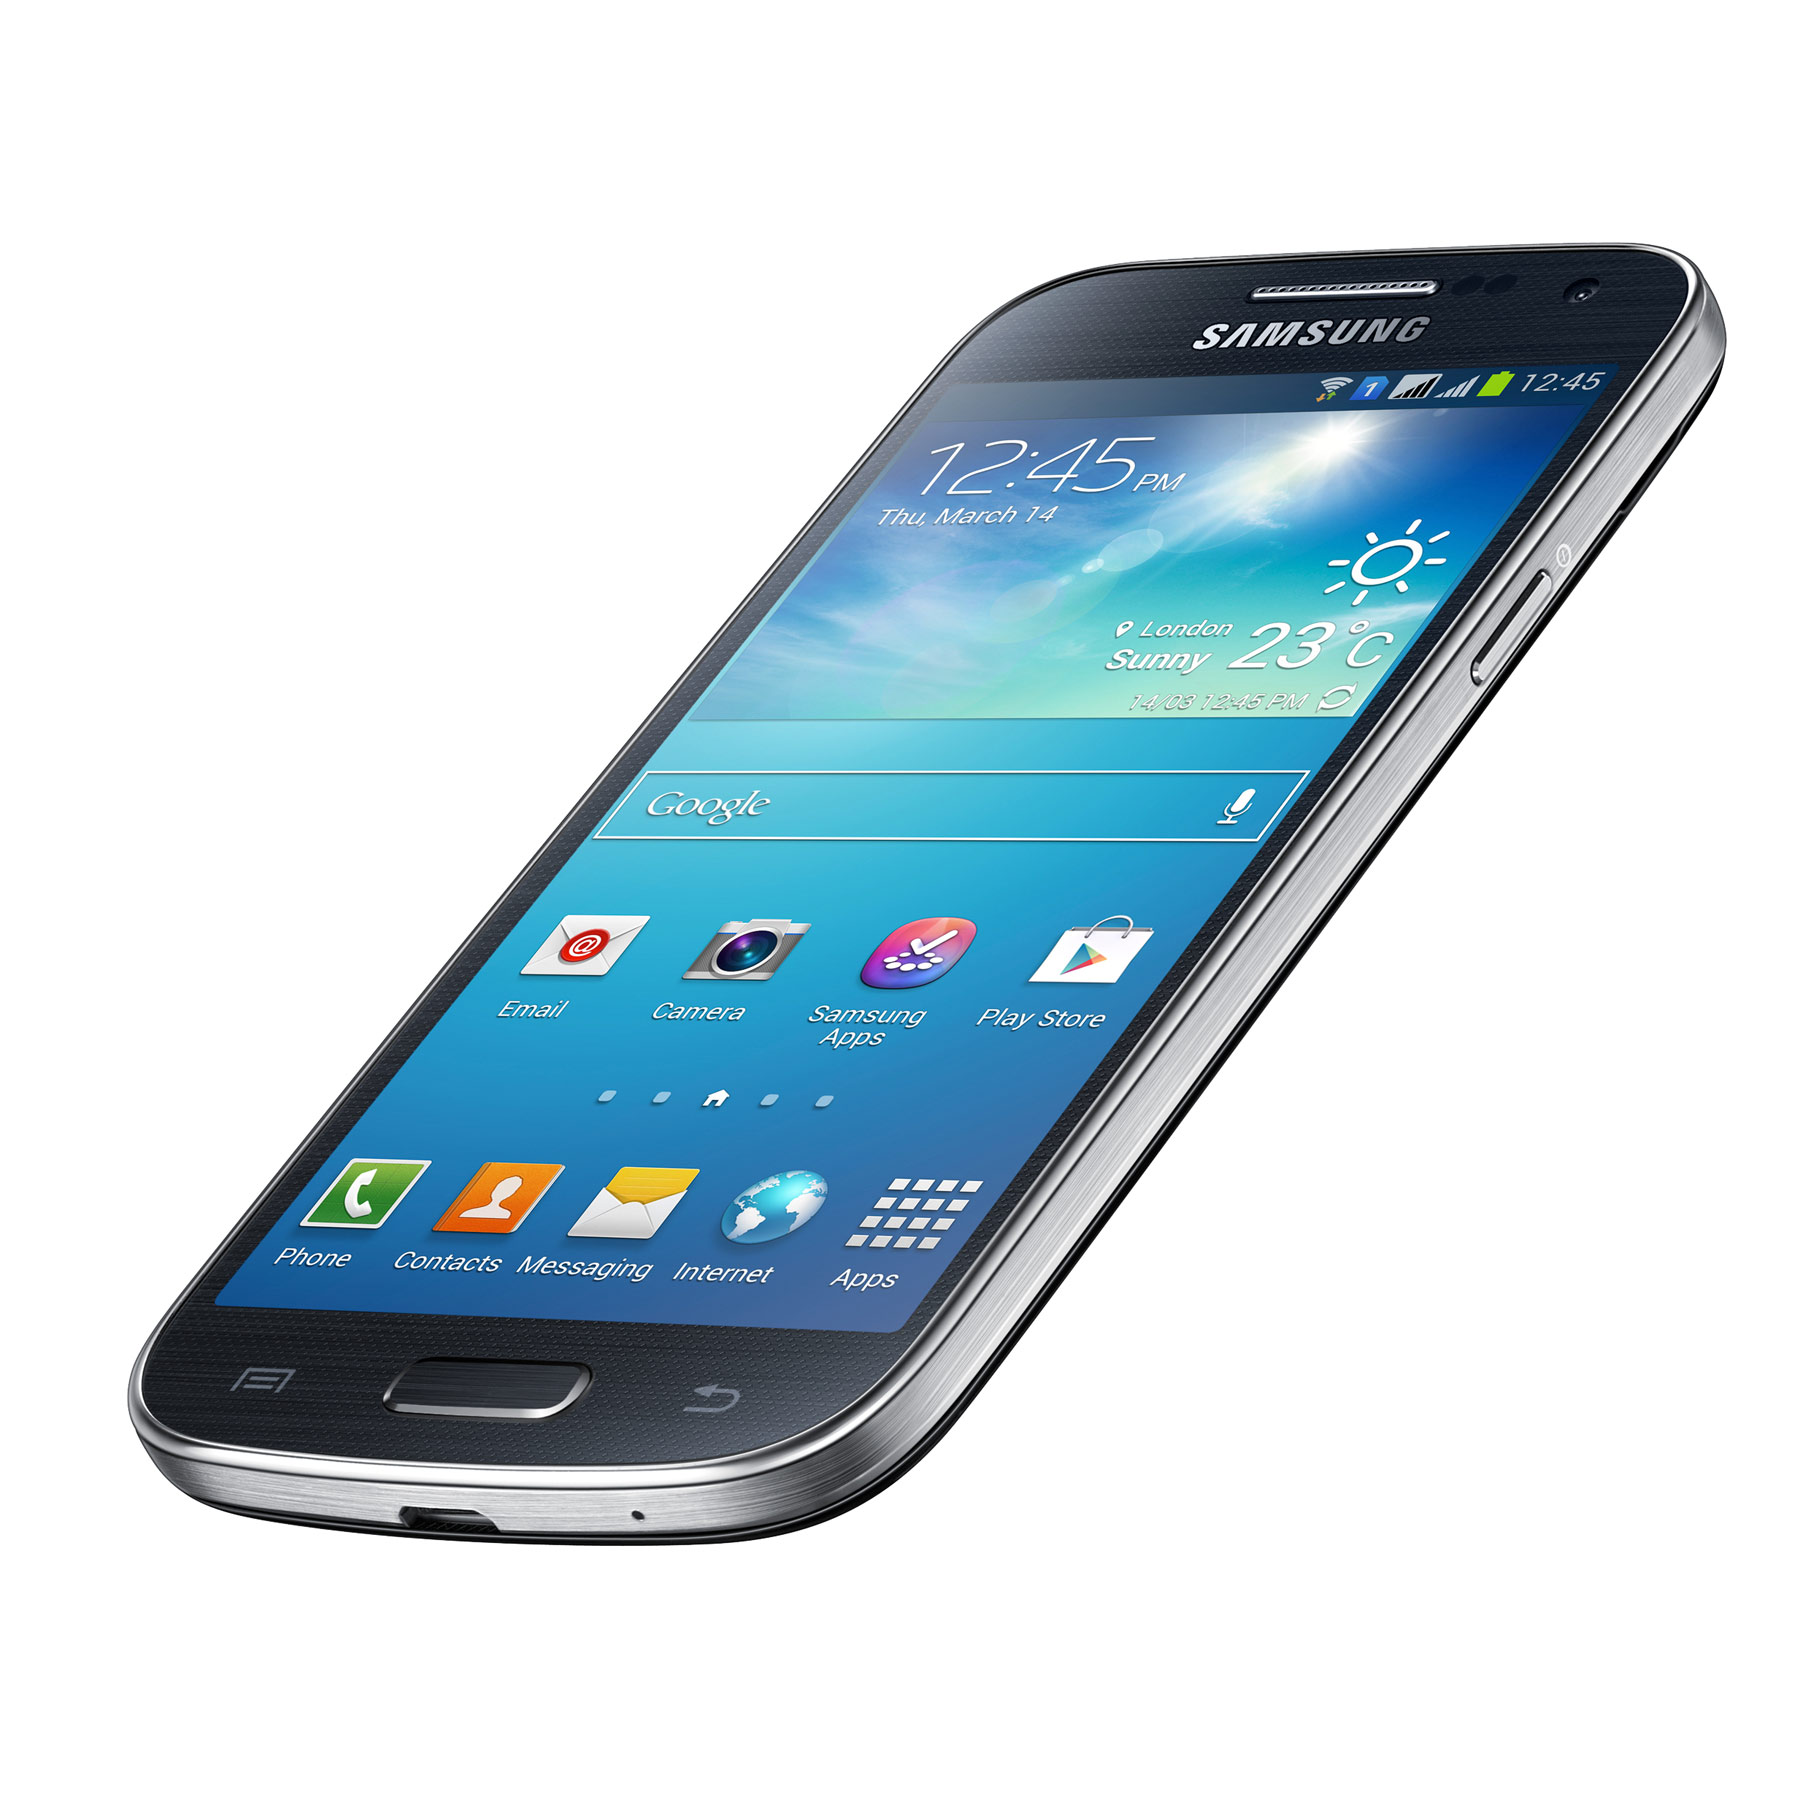 Samsung Galaxy S4 Mini officially launched with 3 models - 3G, 4G, Dual ...